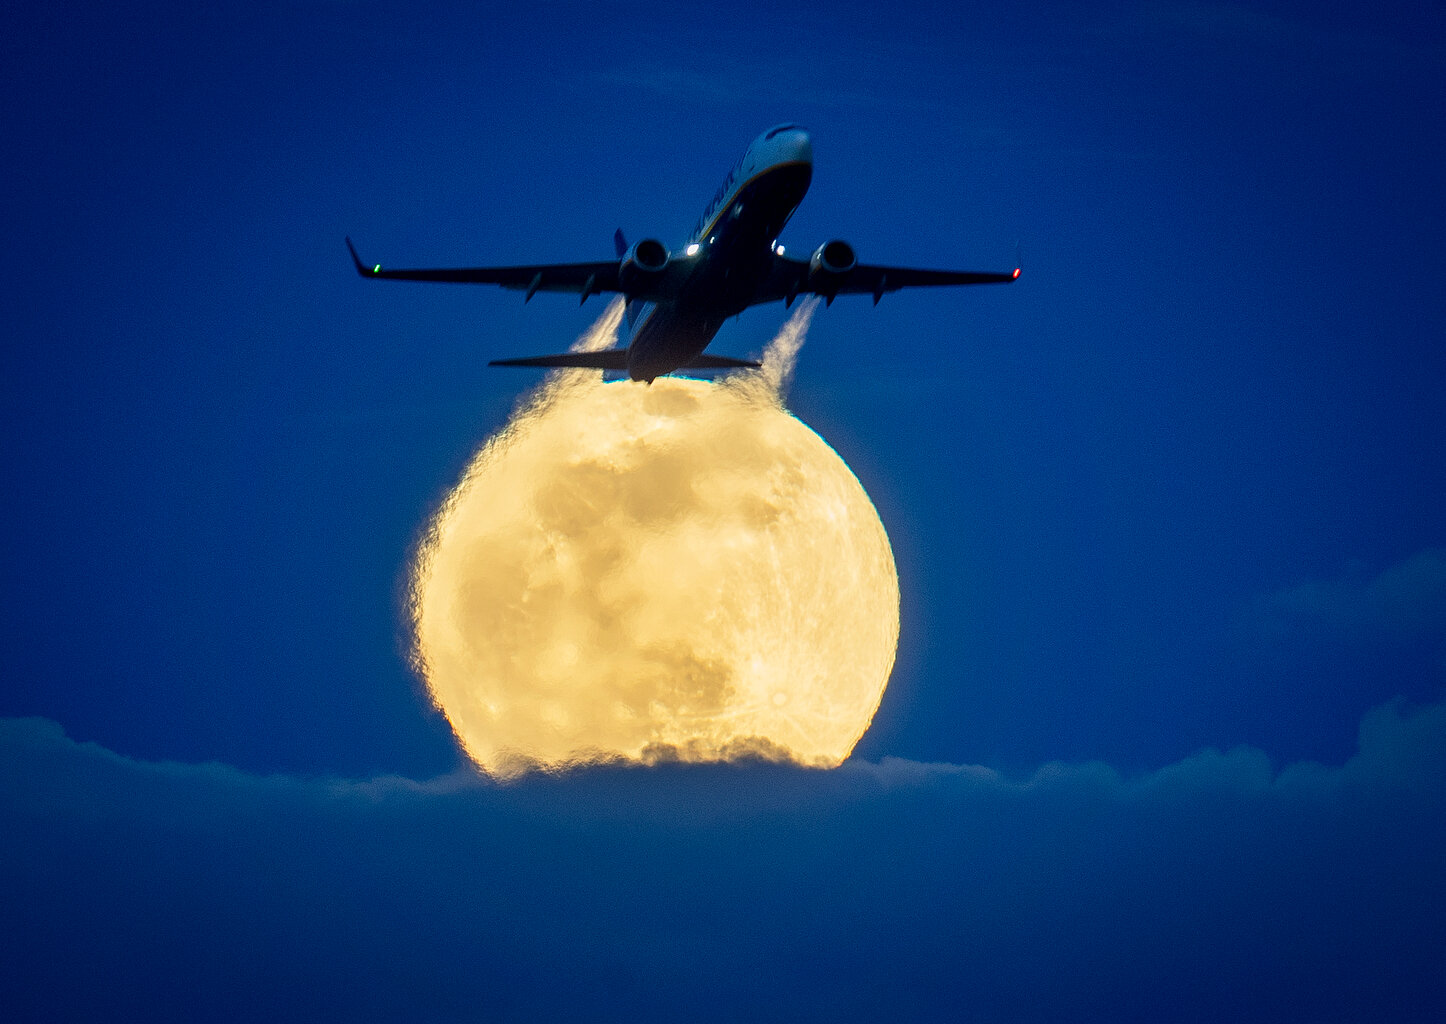  An aircraft passes the rising full moon that breaks through the clouds at the airport in Frankfurt, Germany, Monday, March 9, 2020. (AP Photo/Michael Probst) 